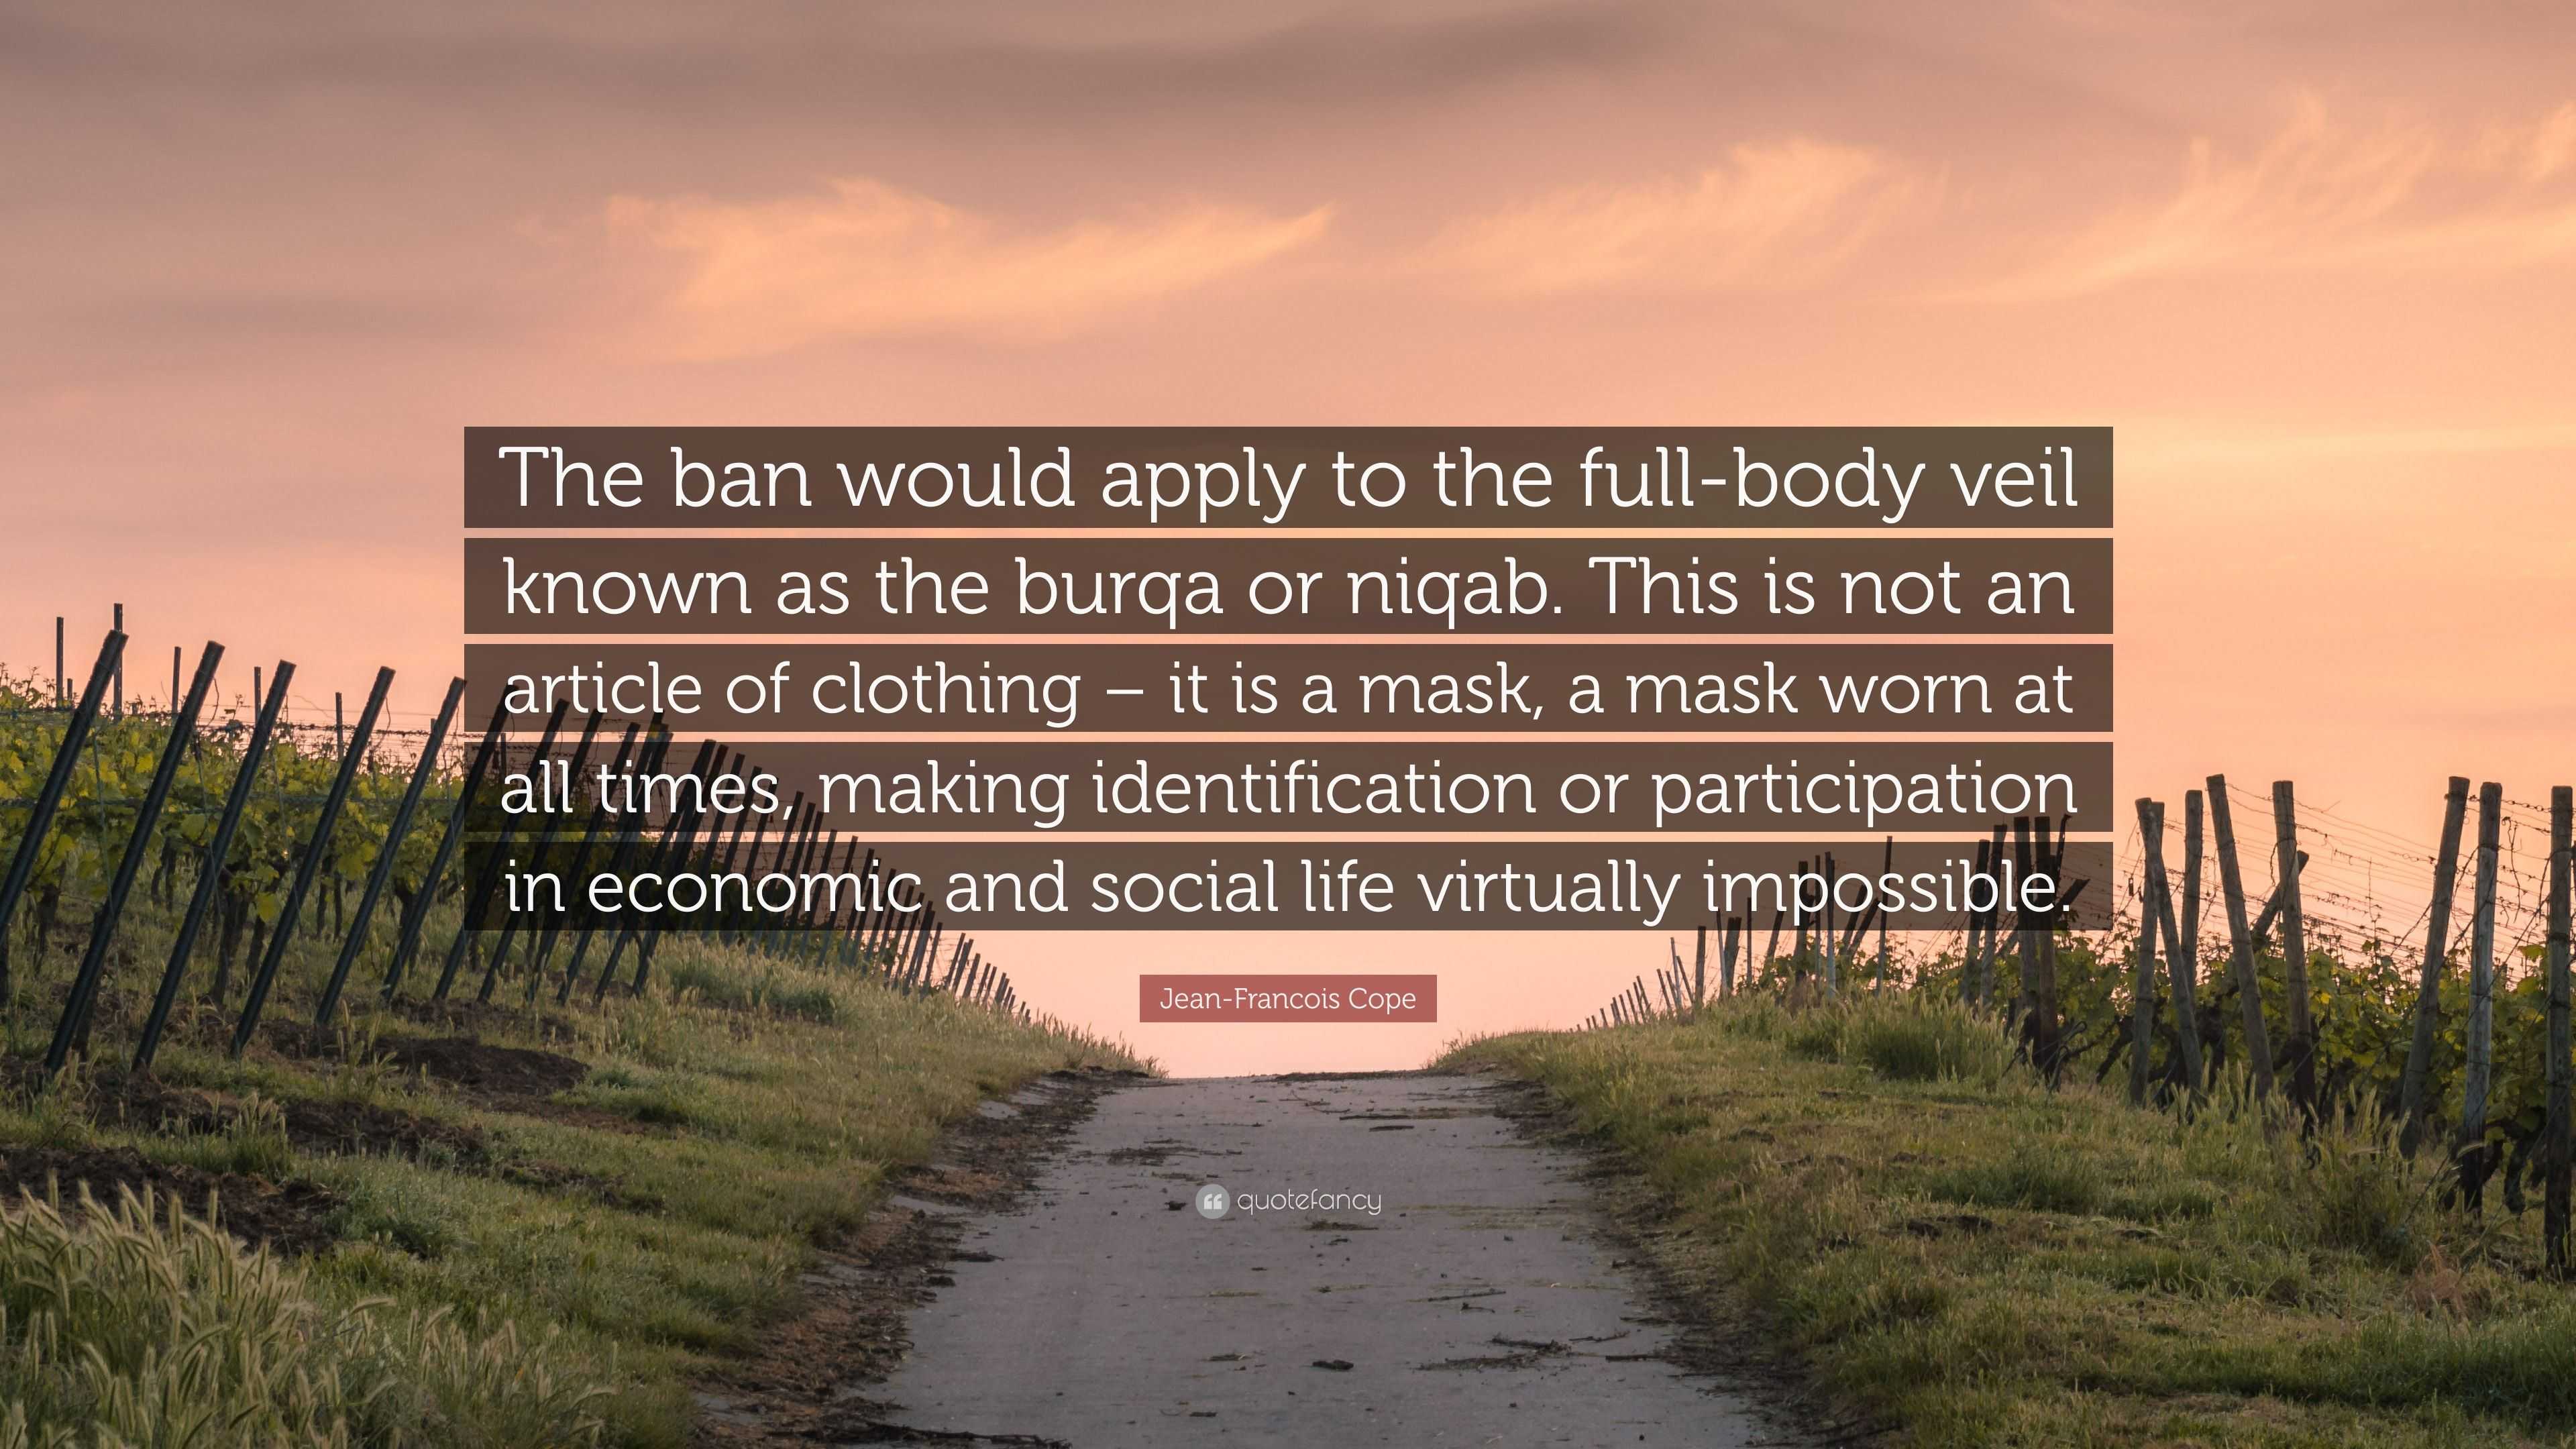 https://quotefancy.com/media/wallpaper/3840x2160/5183984-Jean-Francois-Cope-Quote-The-ban-would-apply-to-the-full-body-veil.jpg